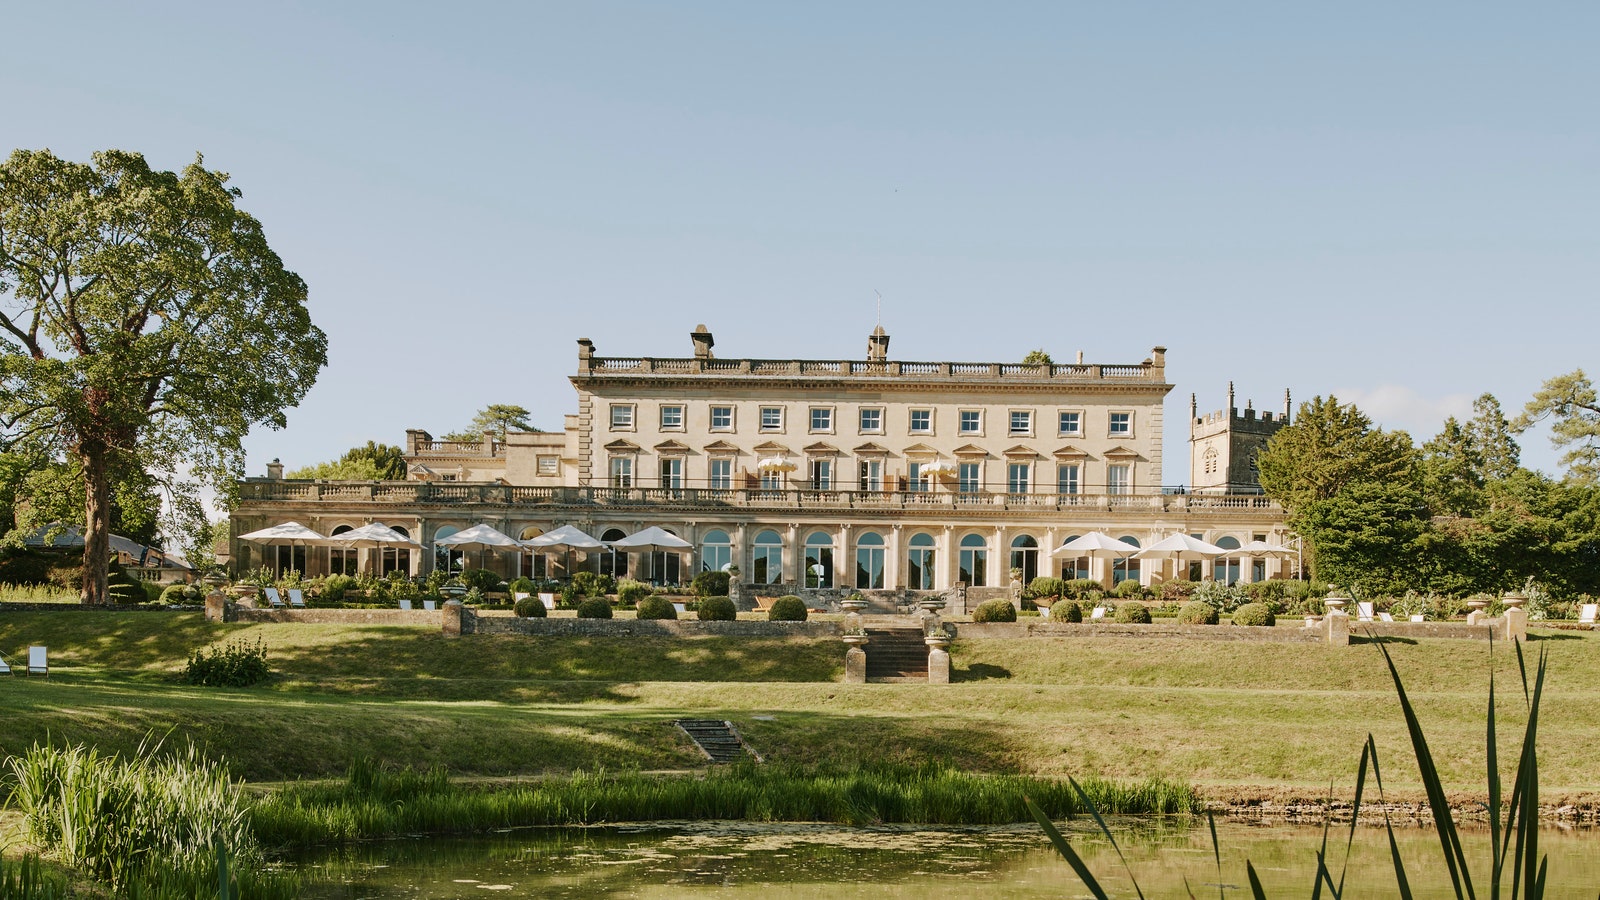 The 20 best country house hotels across the UK